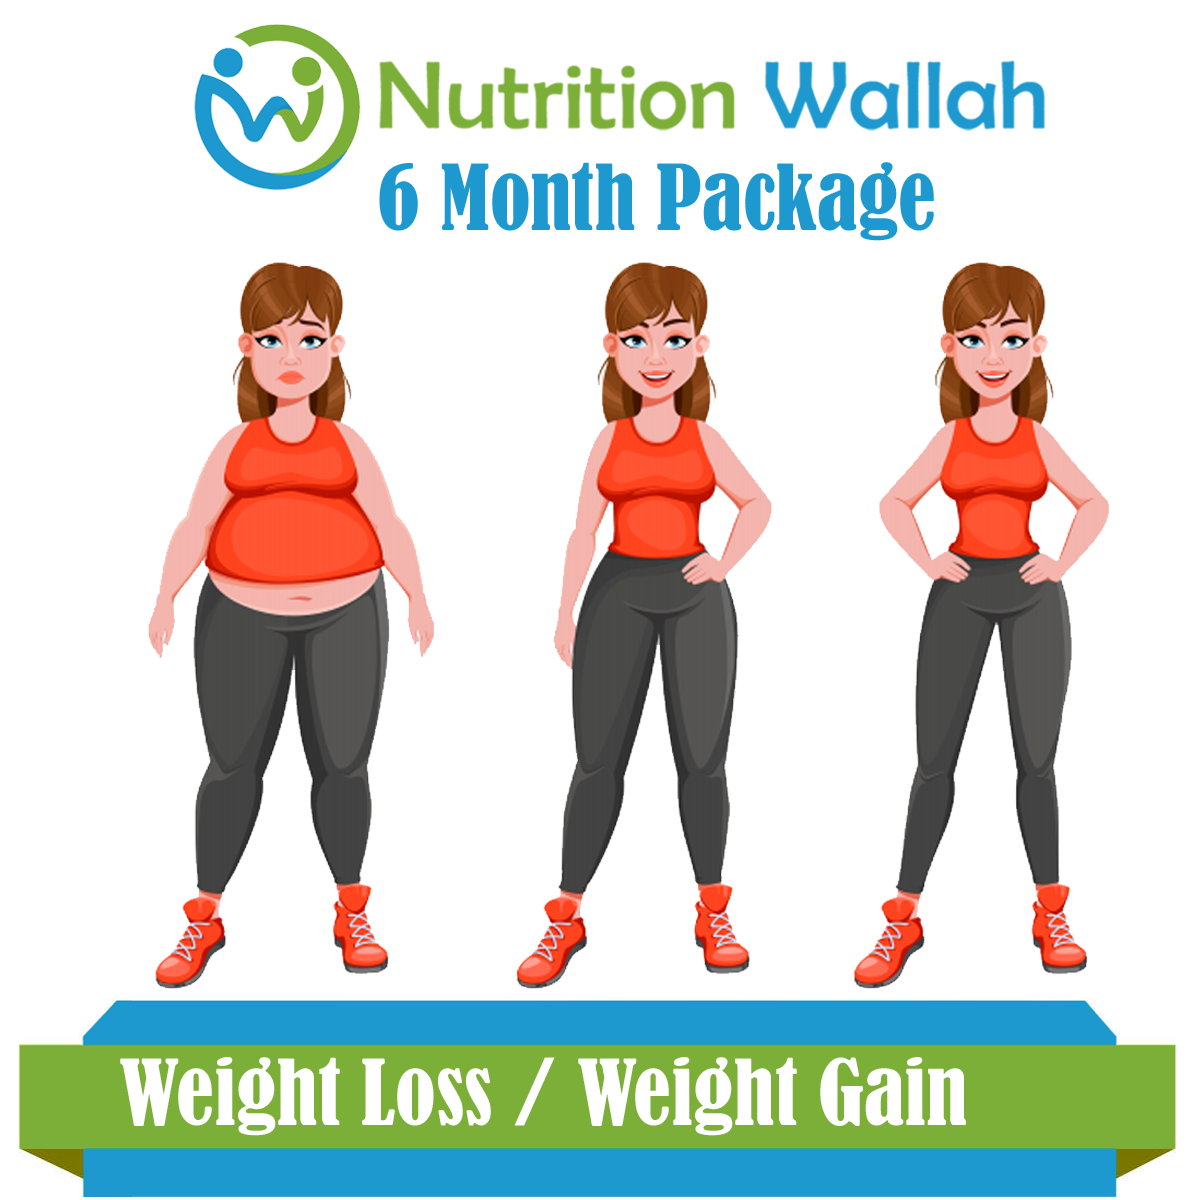 6 Month Package Weight Loss or Weight Gain
